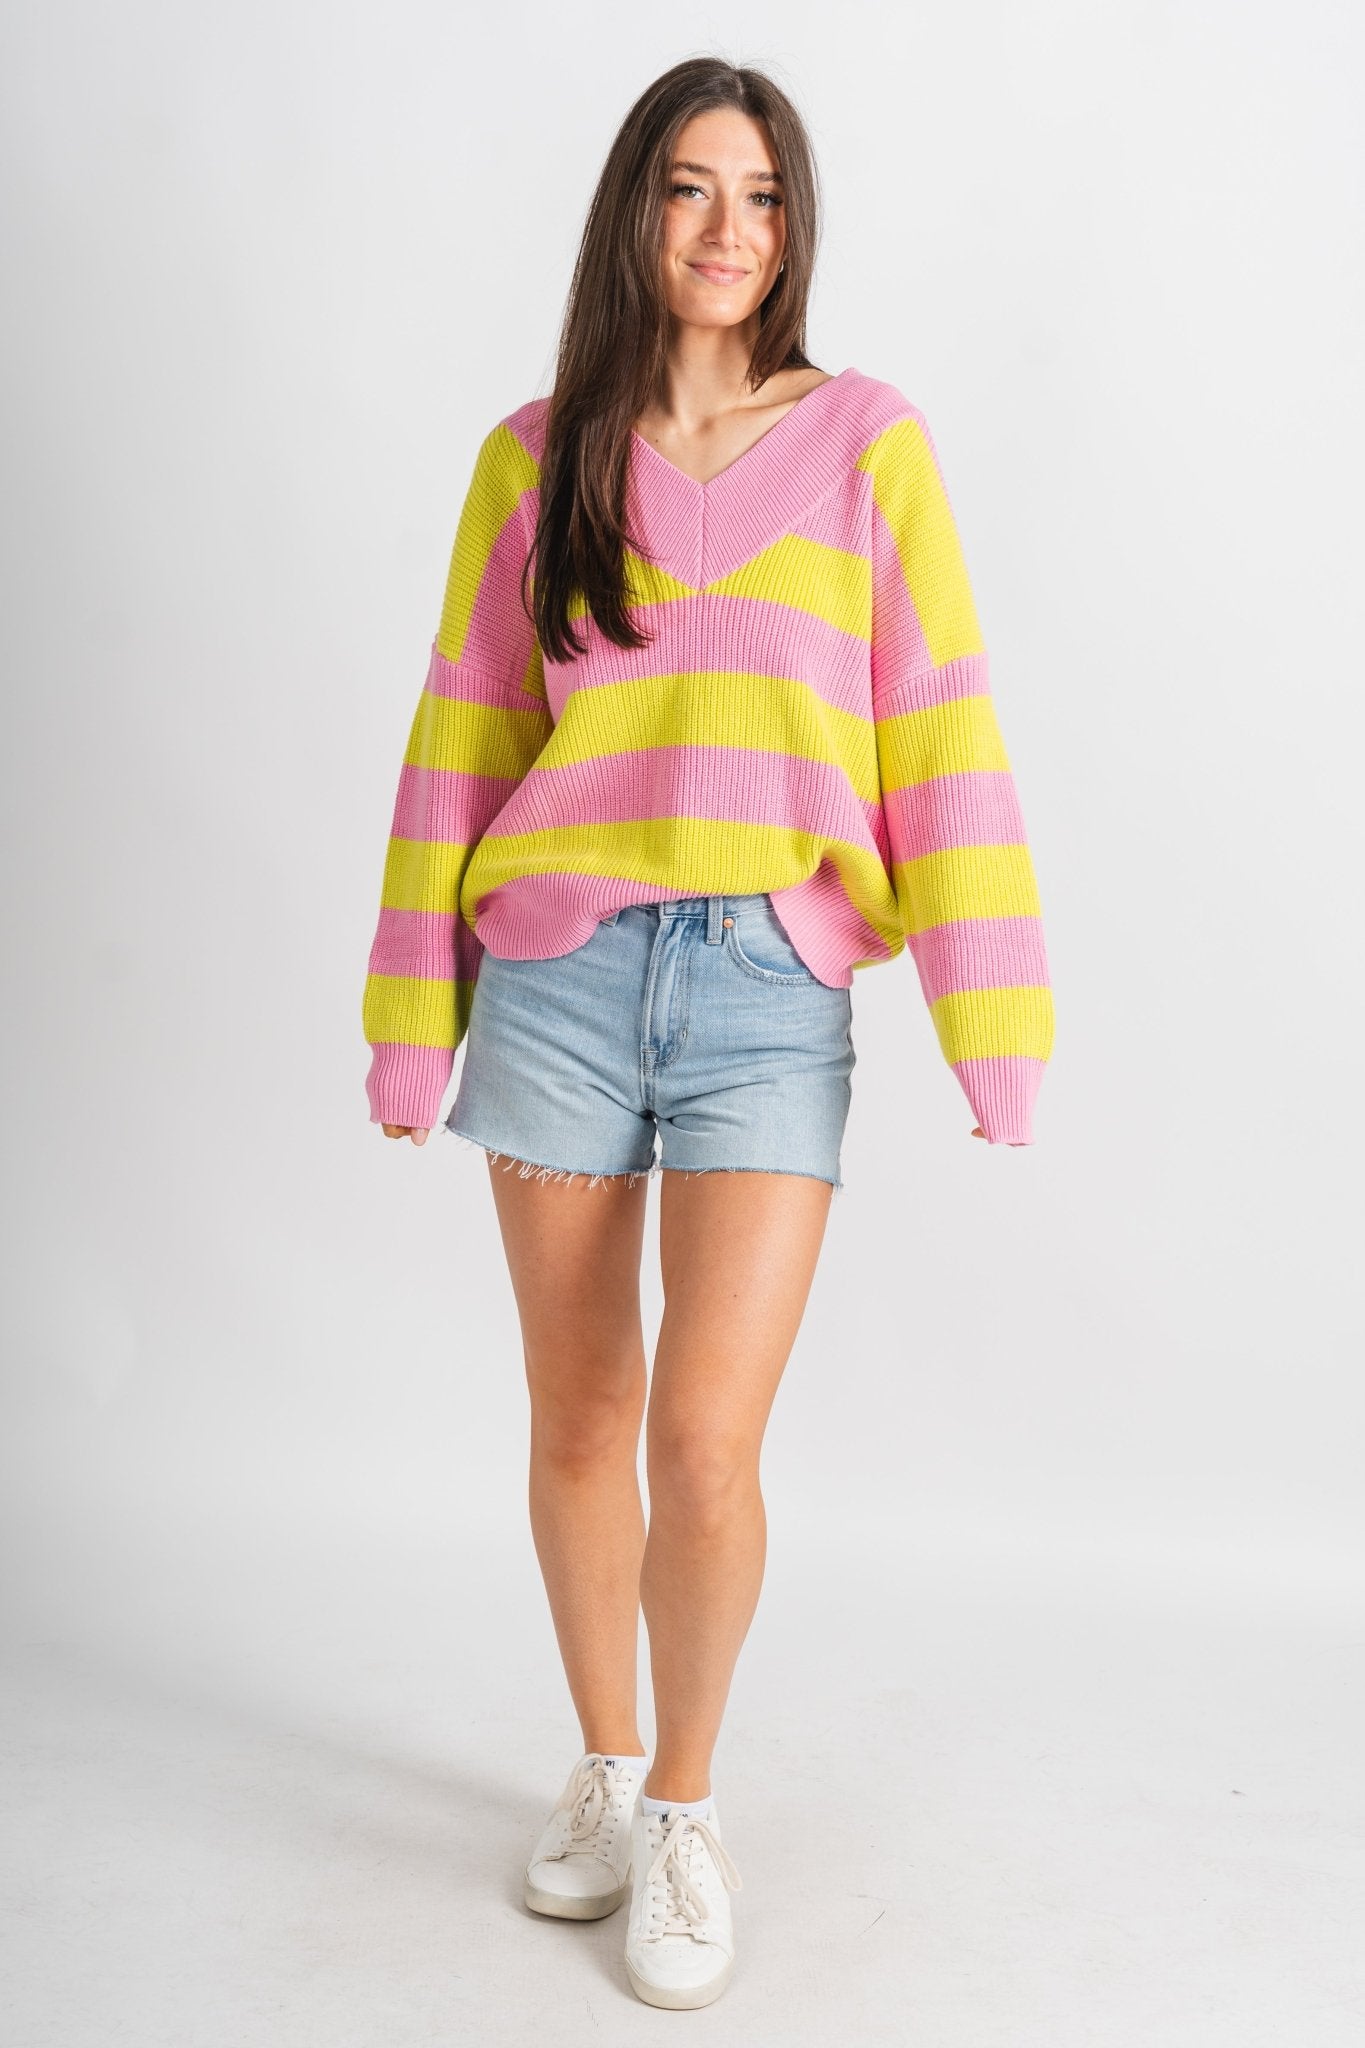 Stripe v-neck sweater pink/lime - Trendy Sweaters | Cute Pullover Sweaters at Lush Fashion Lounge Boutique in Oklahoma City